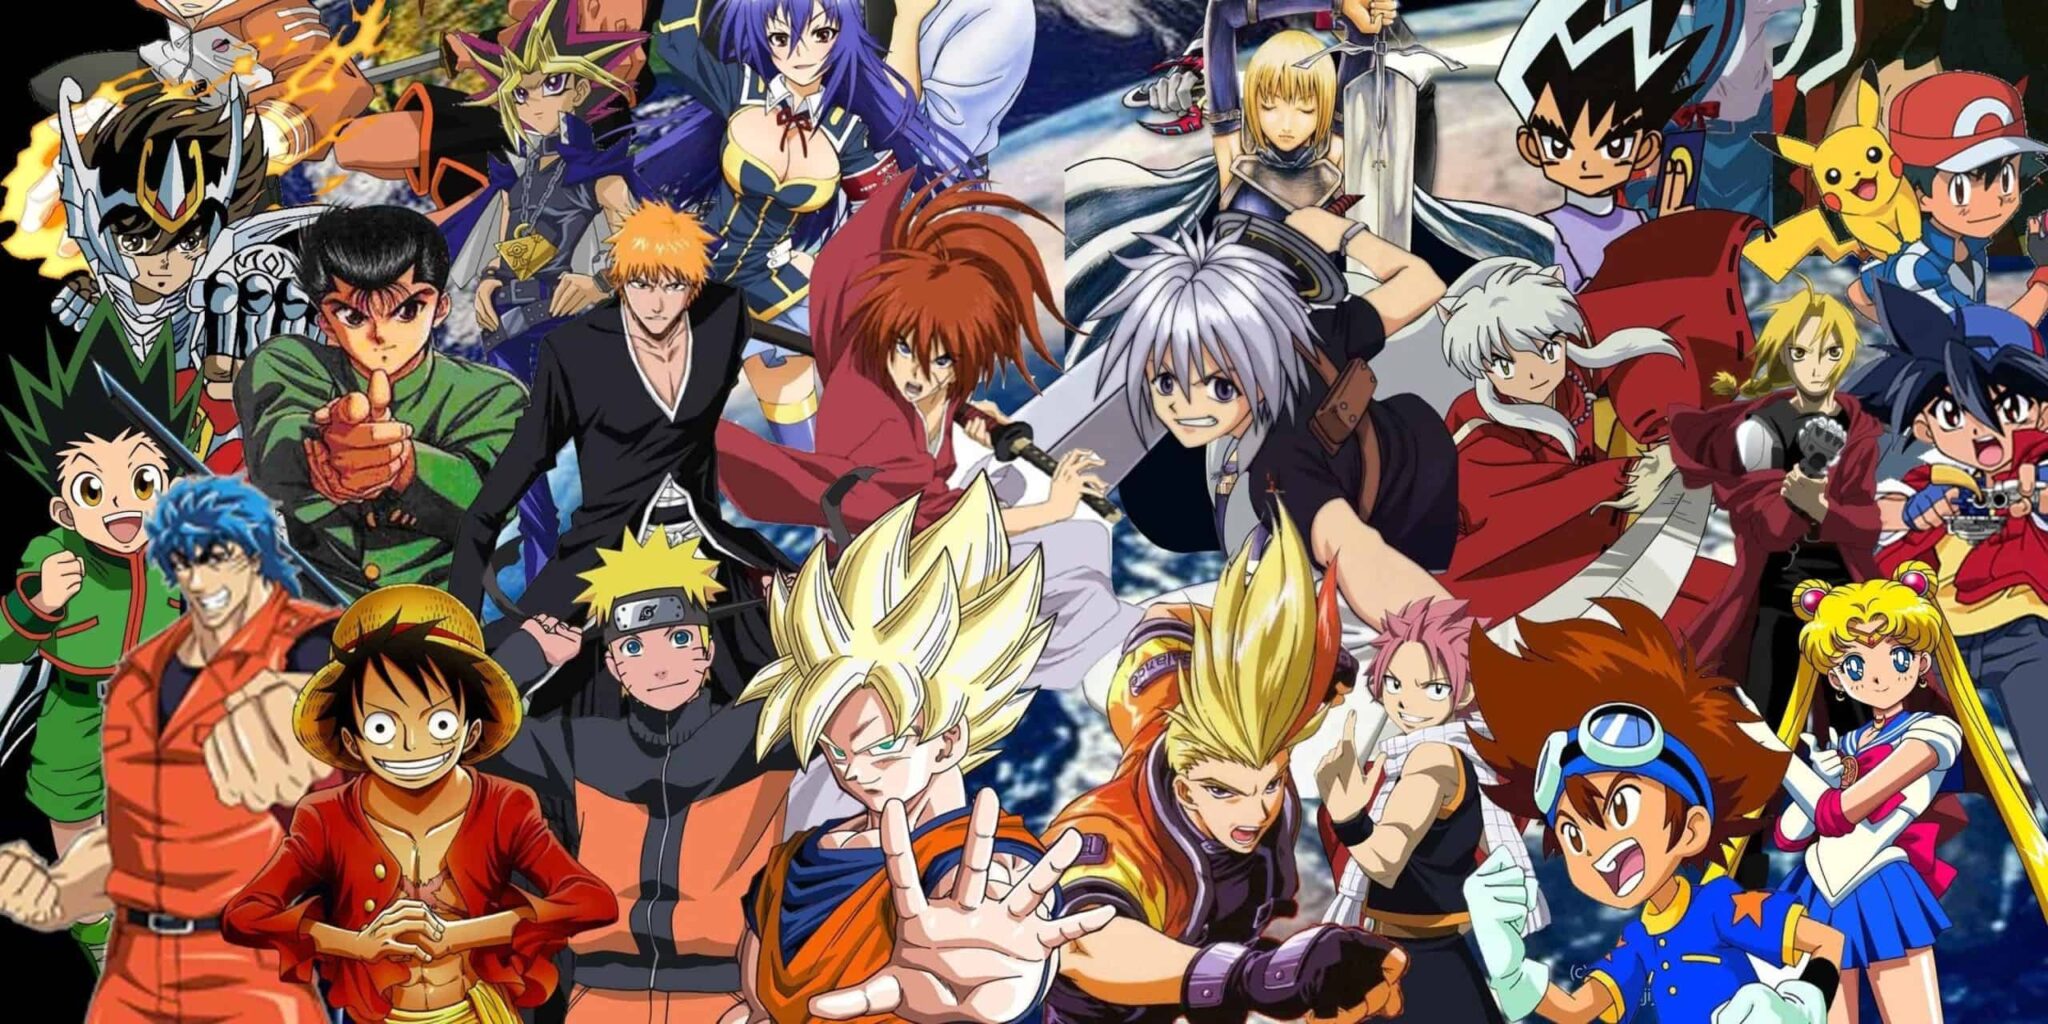 24 Longest Anime Series of All Time | Popular Anime With Longest Run Time -  DotComStories